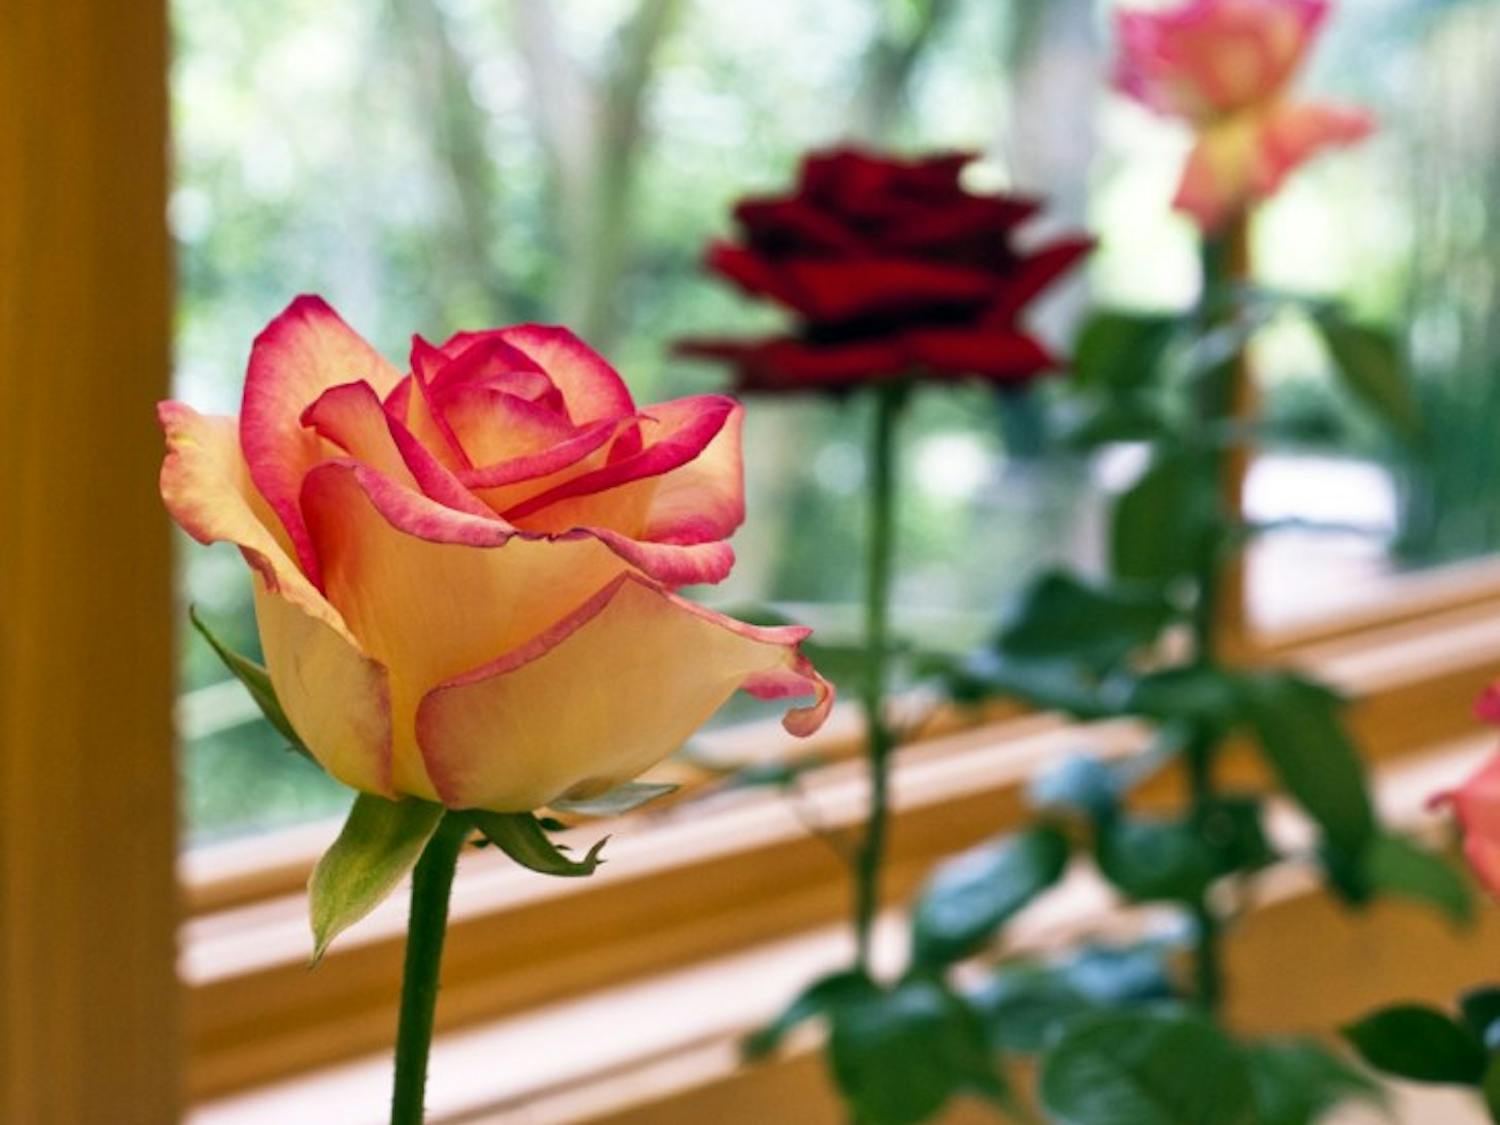 "Jennirene" started out six years ago as a "sport," or an offspring with unusual characteristics, and was named for Steve Felts' daughter. Felts, 54, a plumber from Ocala, had five roses on the winner's table this year. He says growing roses is "a labor of love."